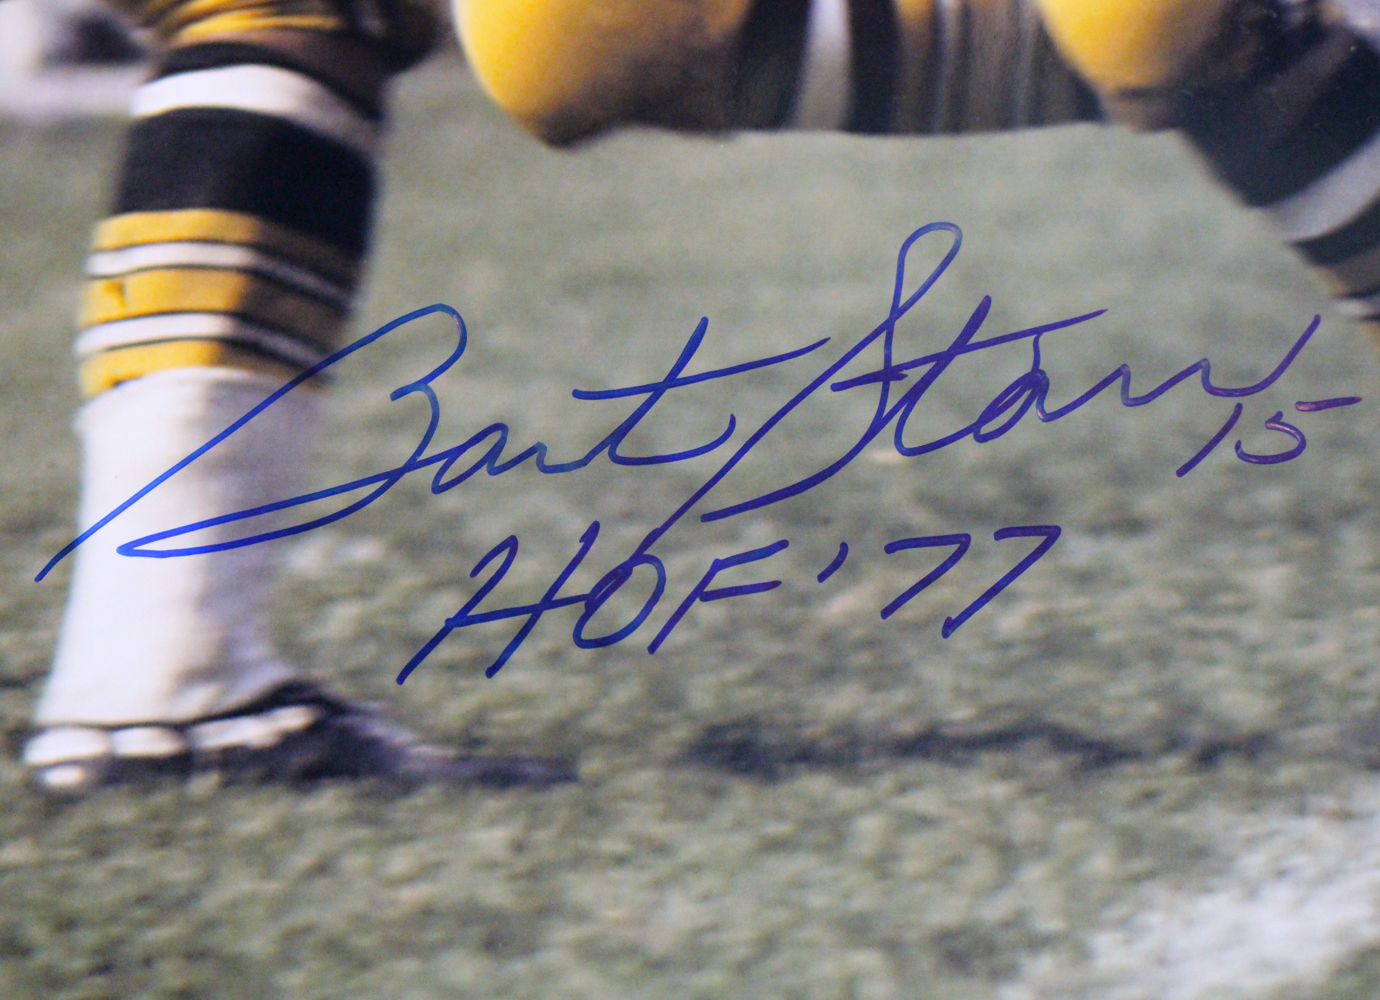 Bart Starr Autographed/Signed Green Bay Packers 16x20 Photo HOF Tristar